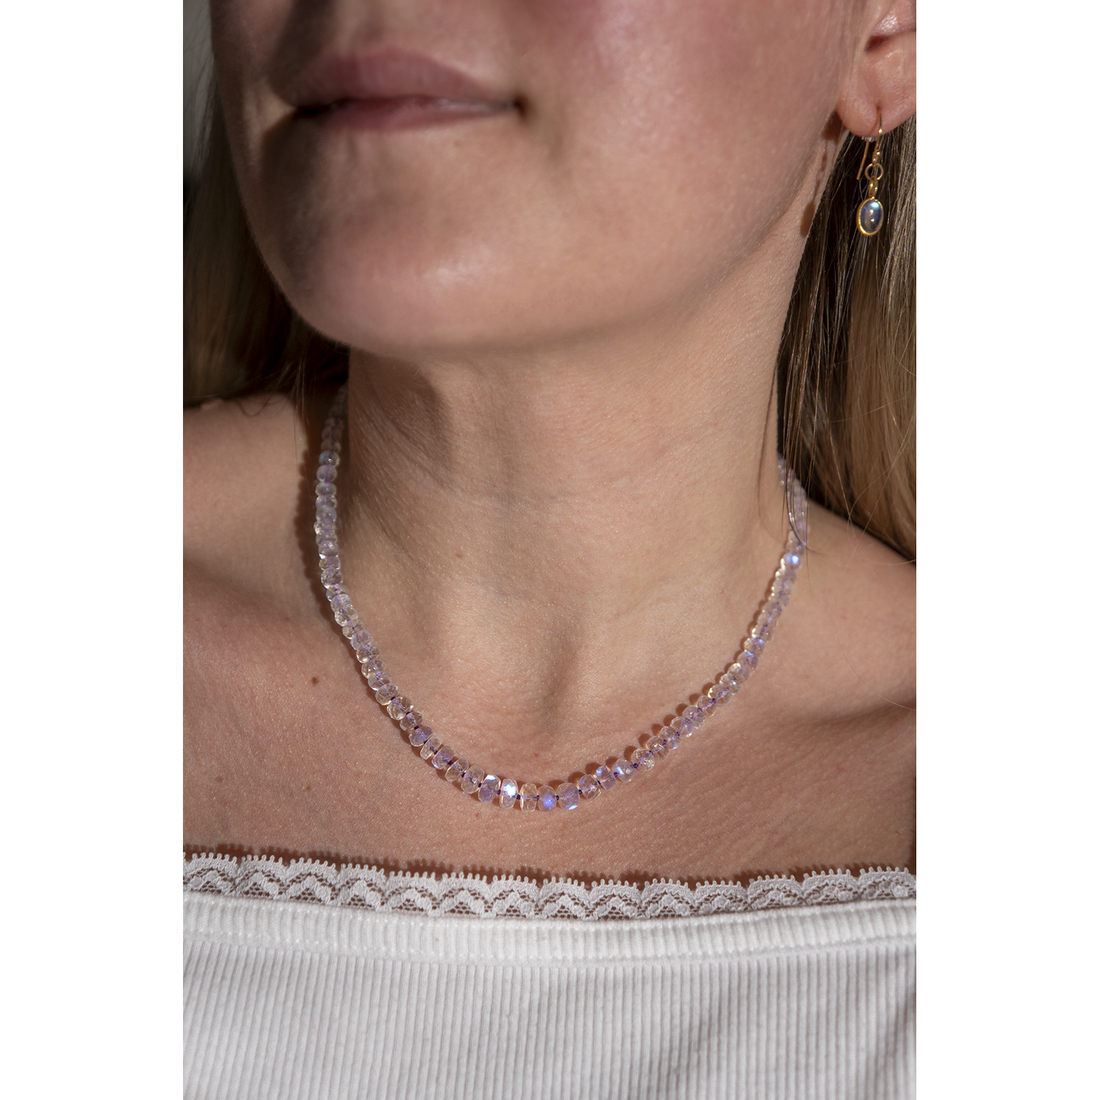 Why should I wear a moonstone beaded necklace?